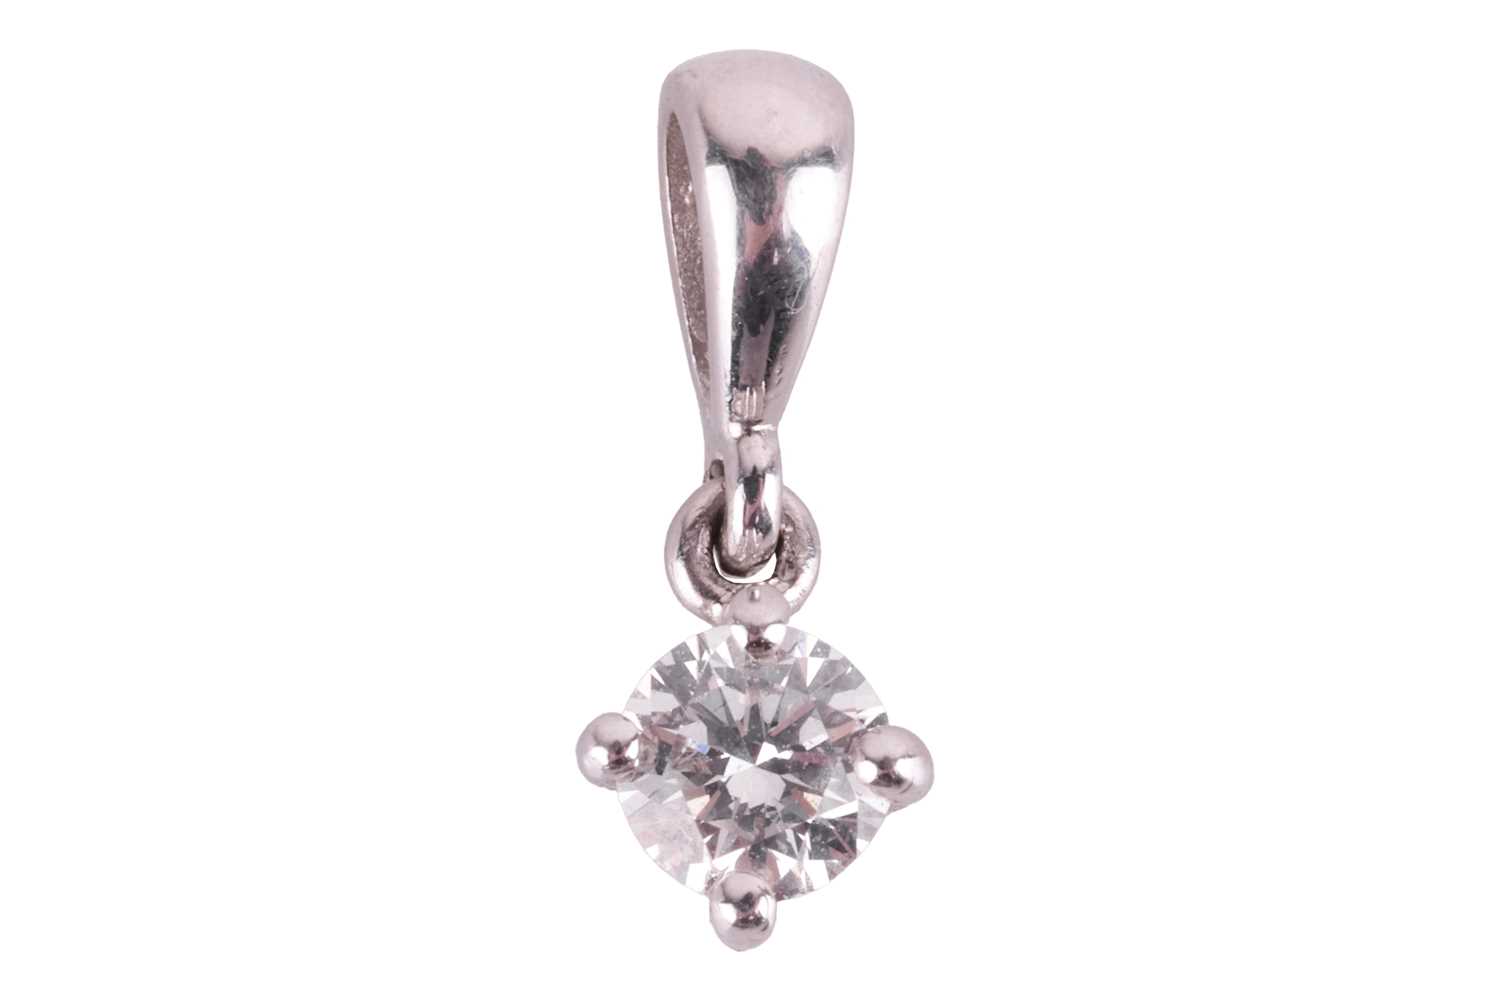 A diamond solitaire pendant, the round brilliant diamond measuring approximately 3.7mm, with an esti